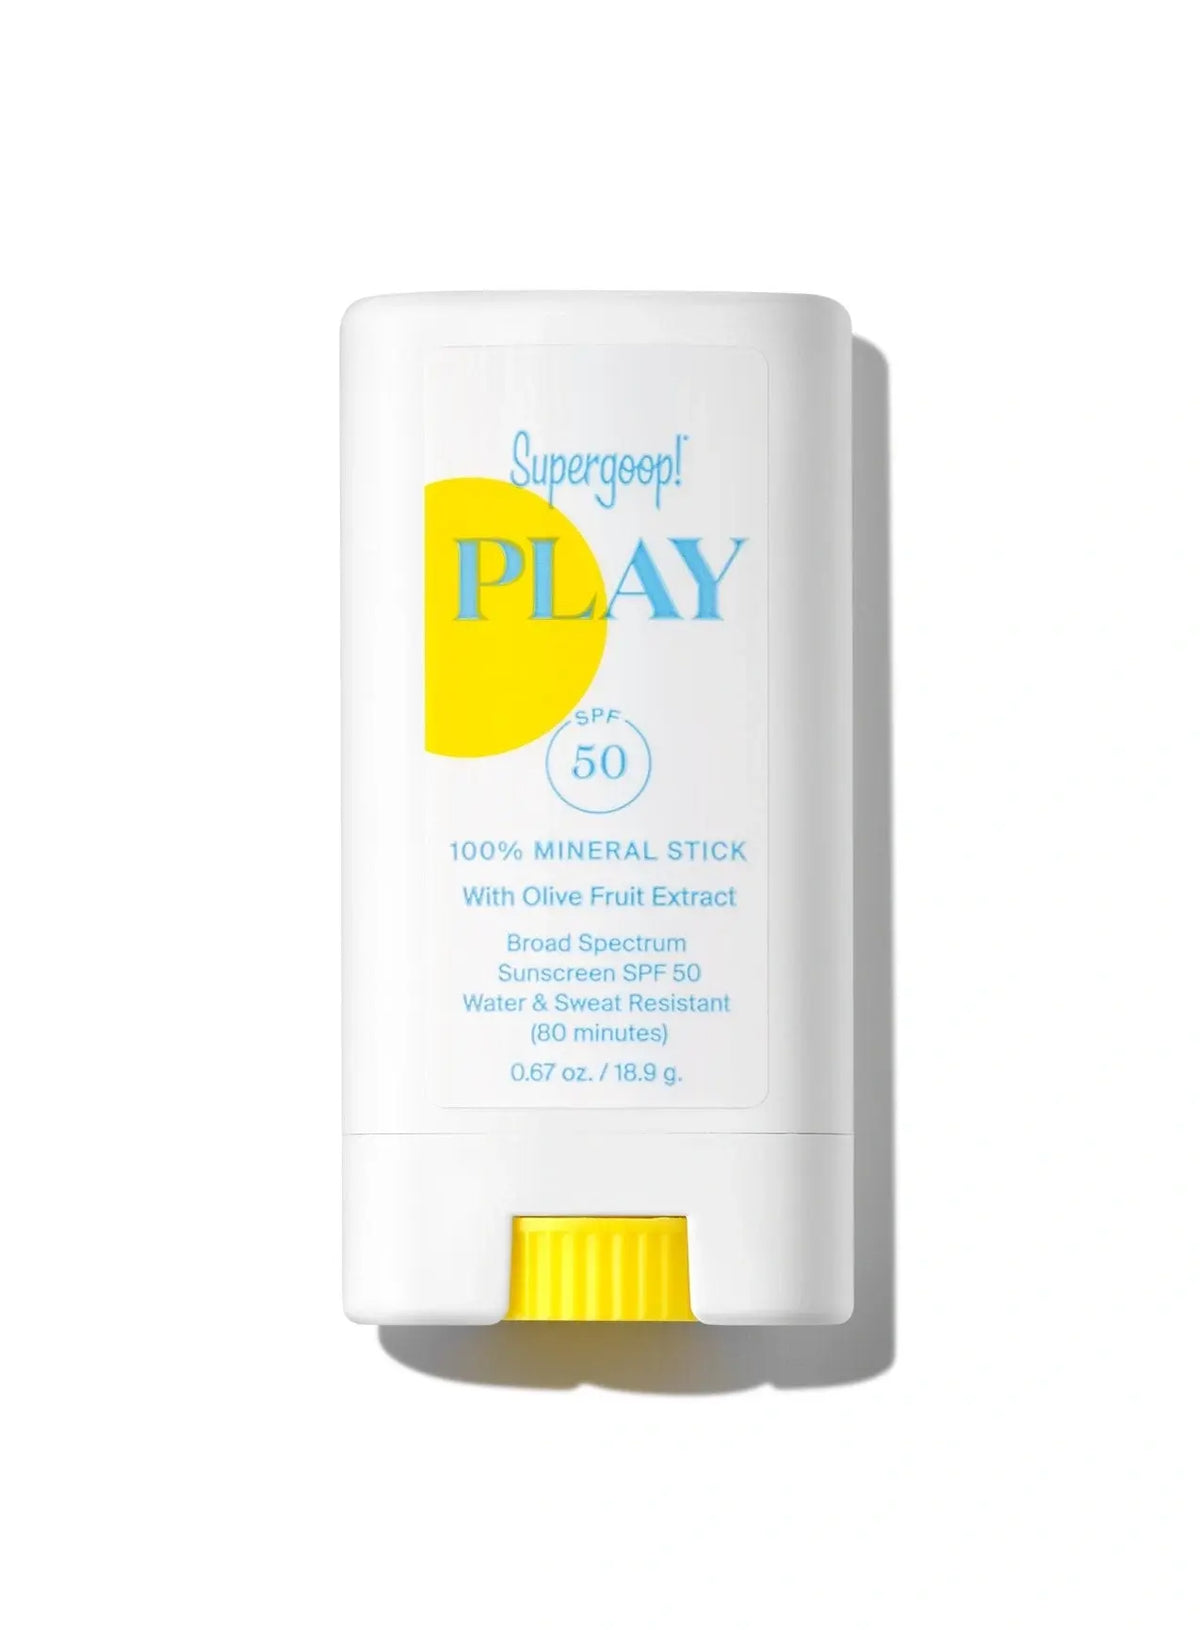 PLAY 100% Mineral Stick SPF 50